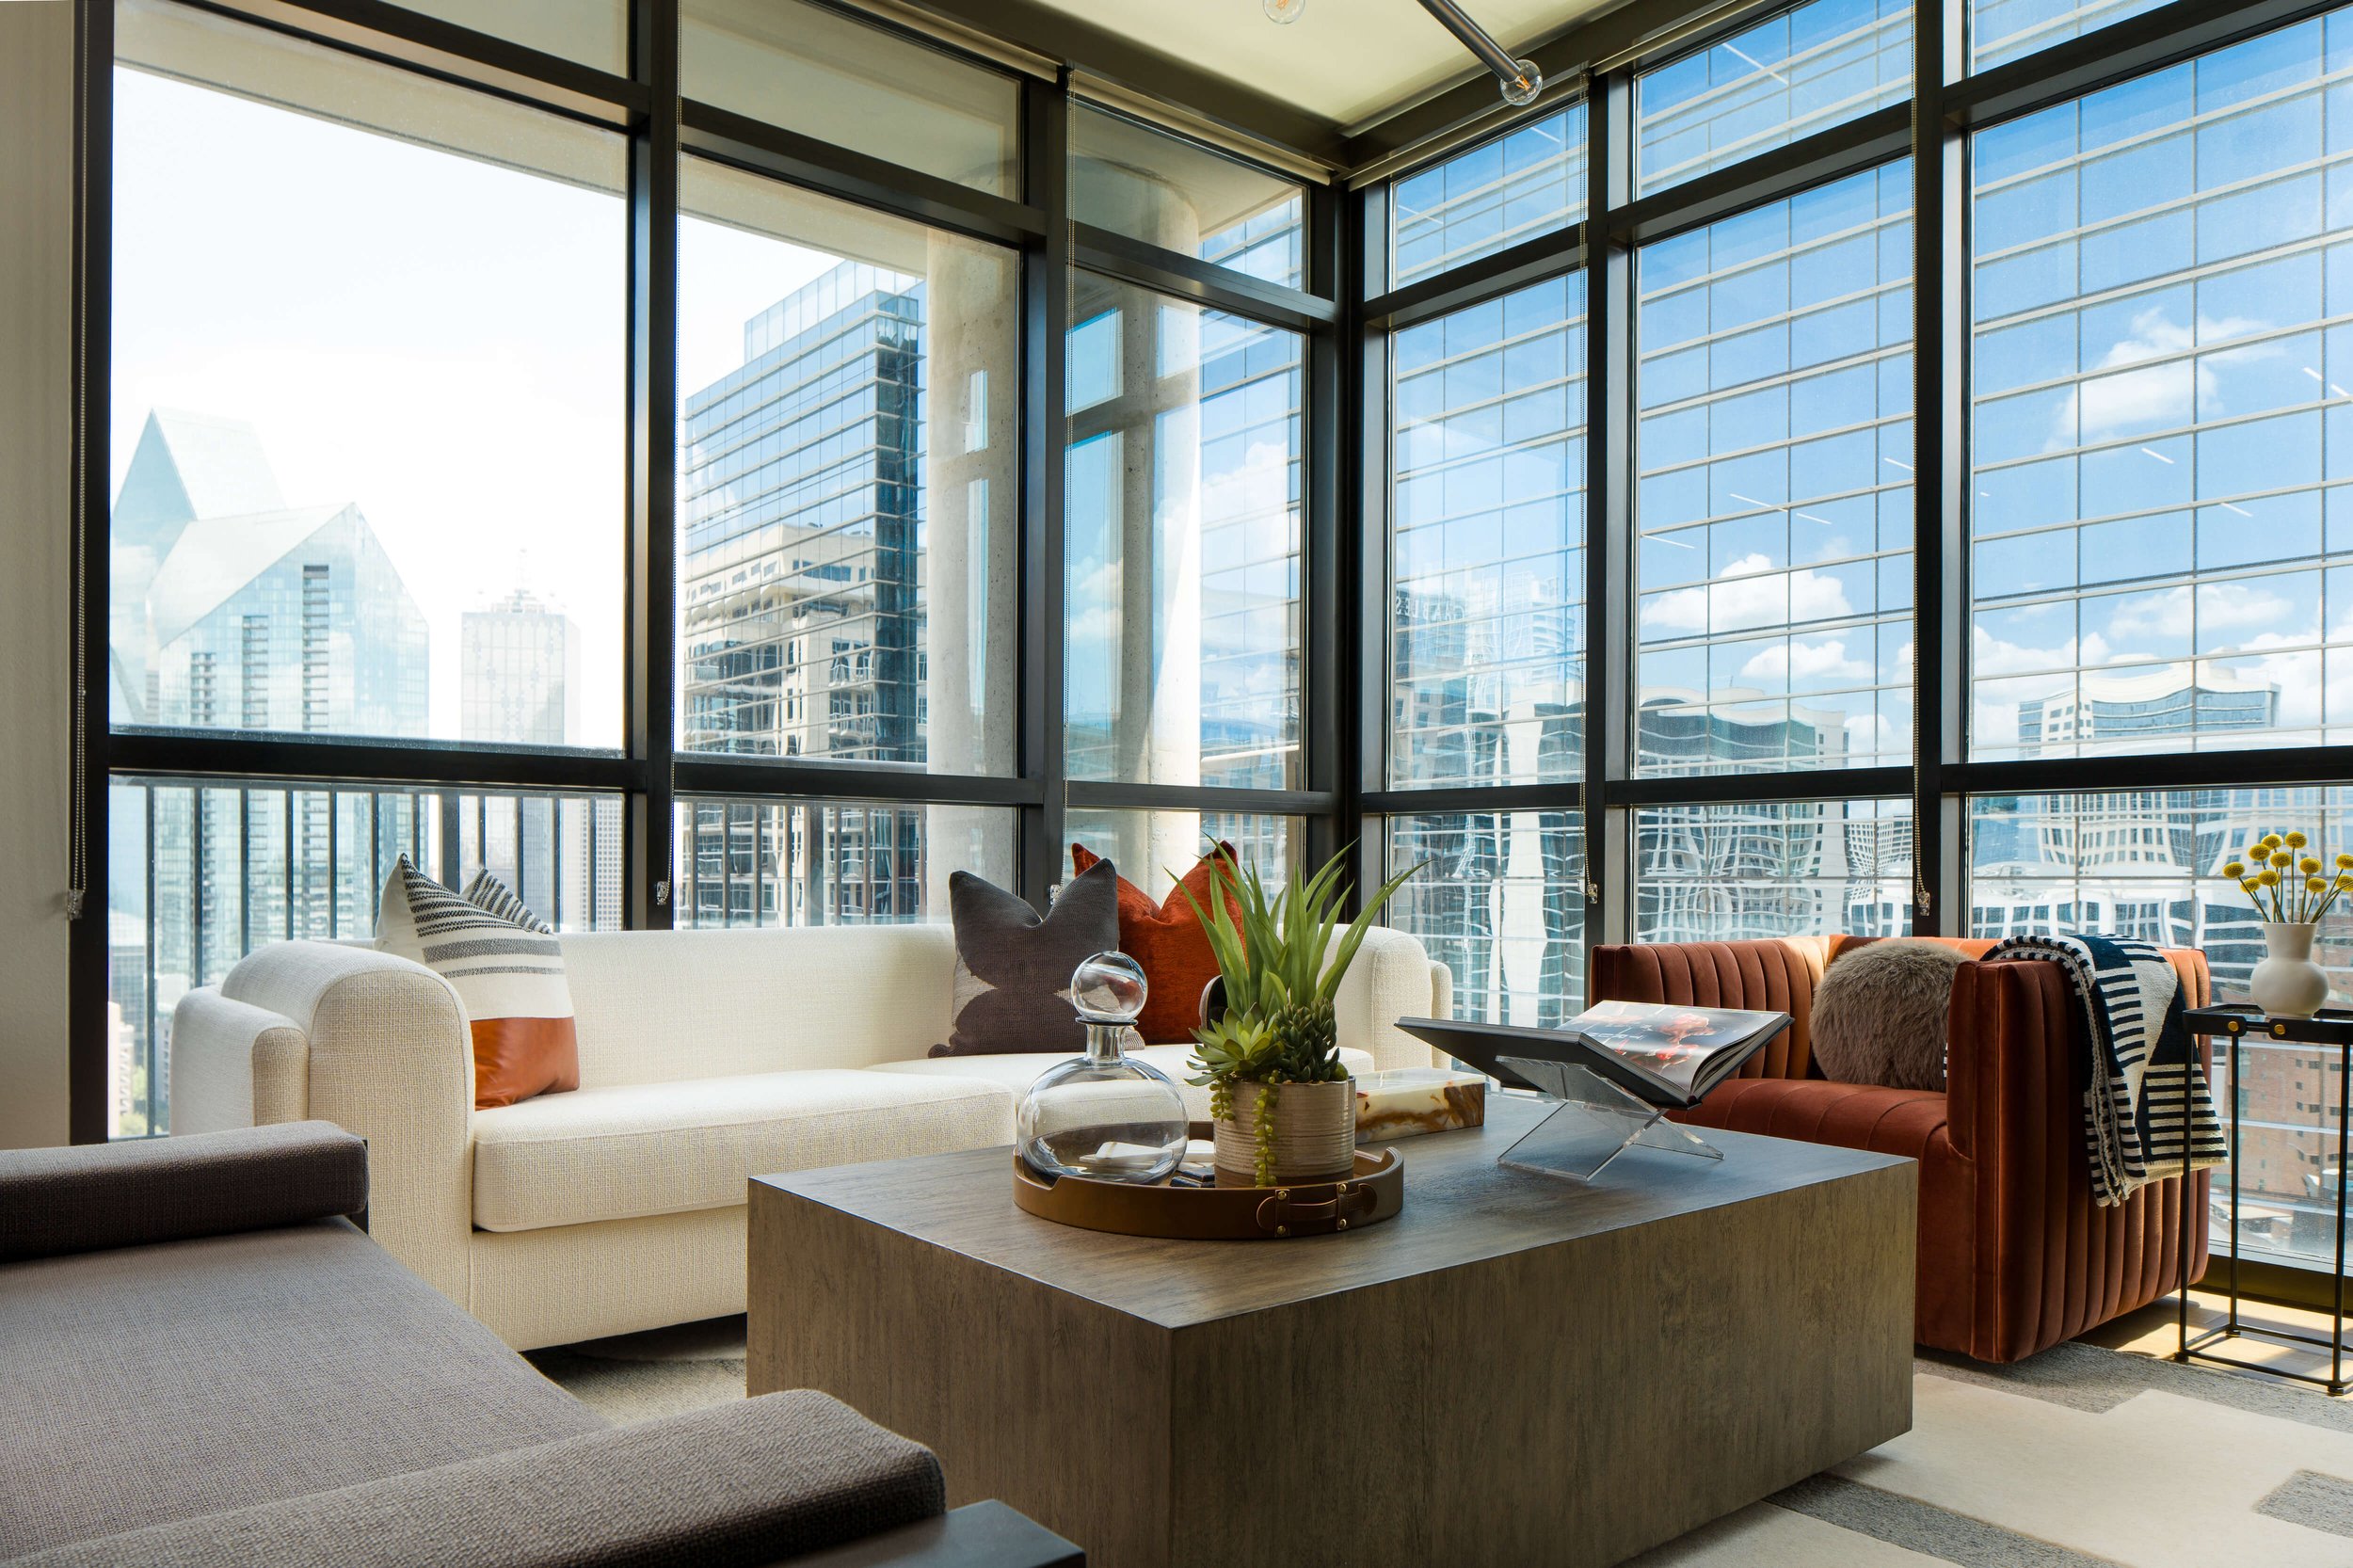 This downtown dallas high rise bachelor pad is designed by Travis Pernell interiors